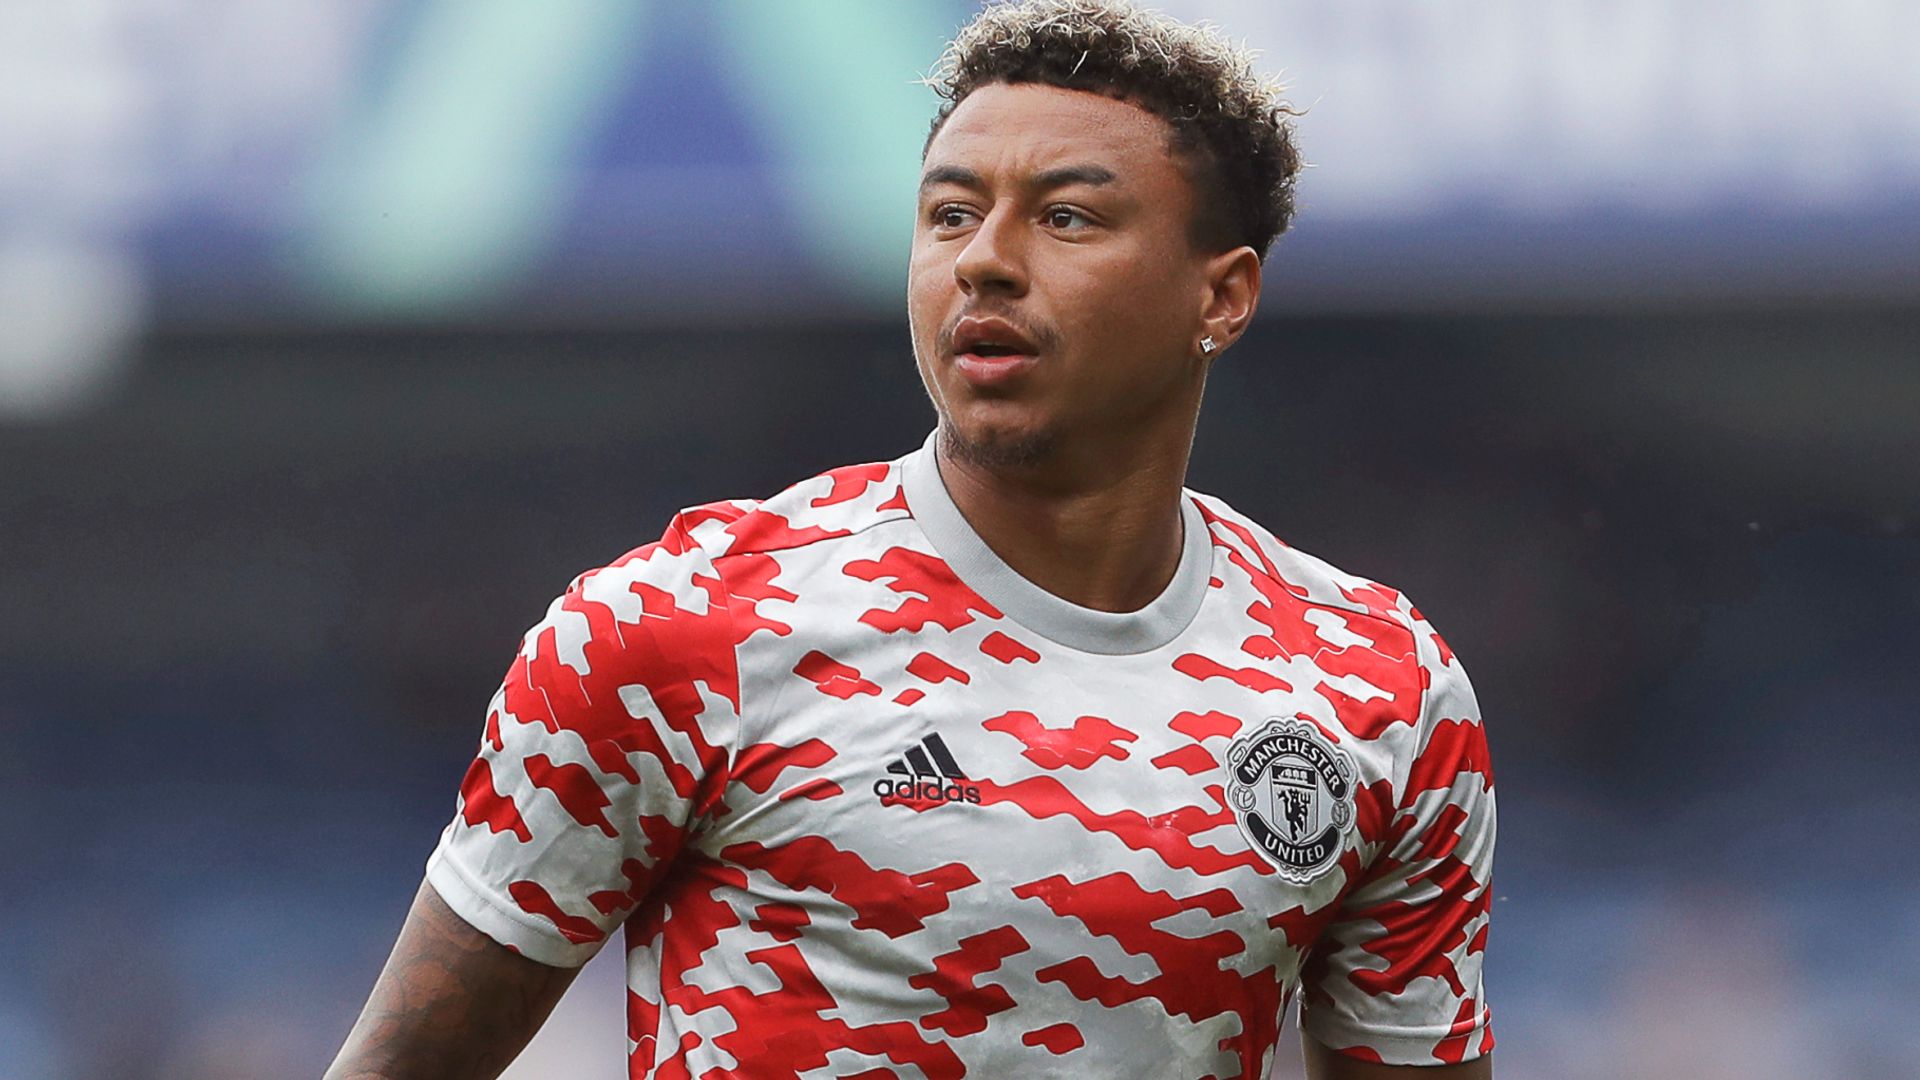 Forest in talks to sign Lingard | West Ham awaiting decision